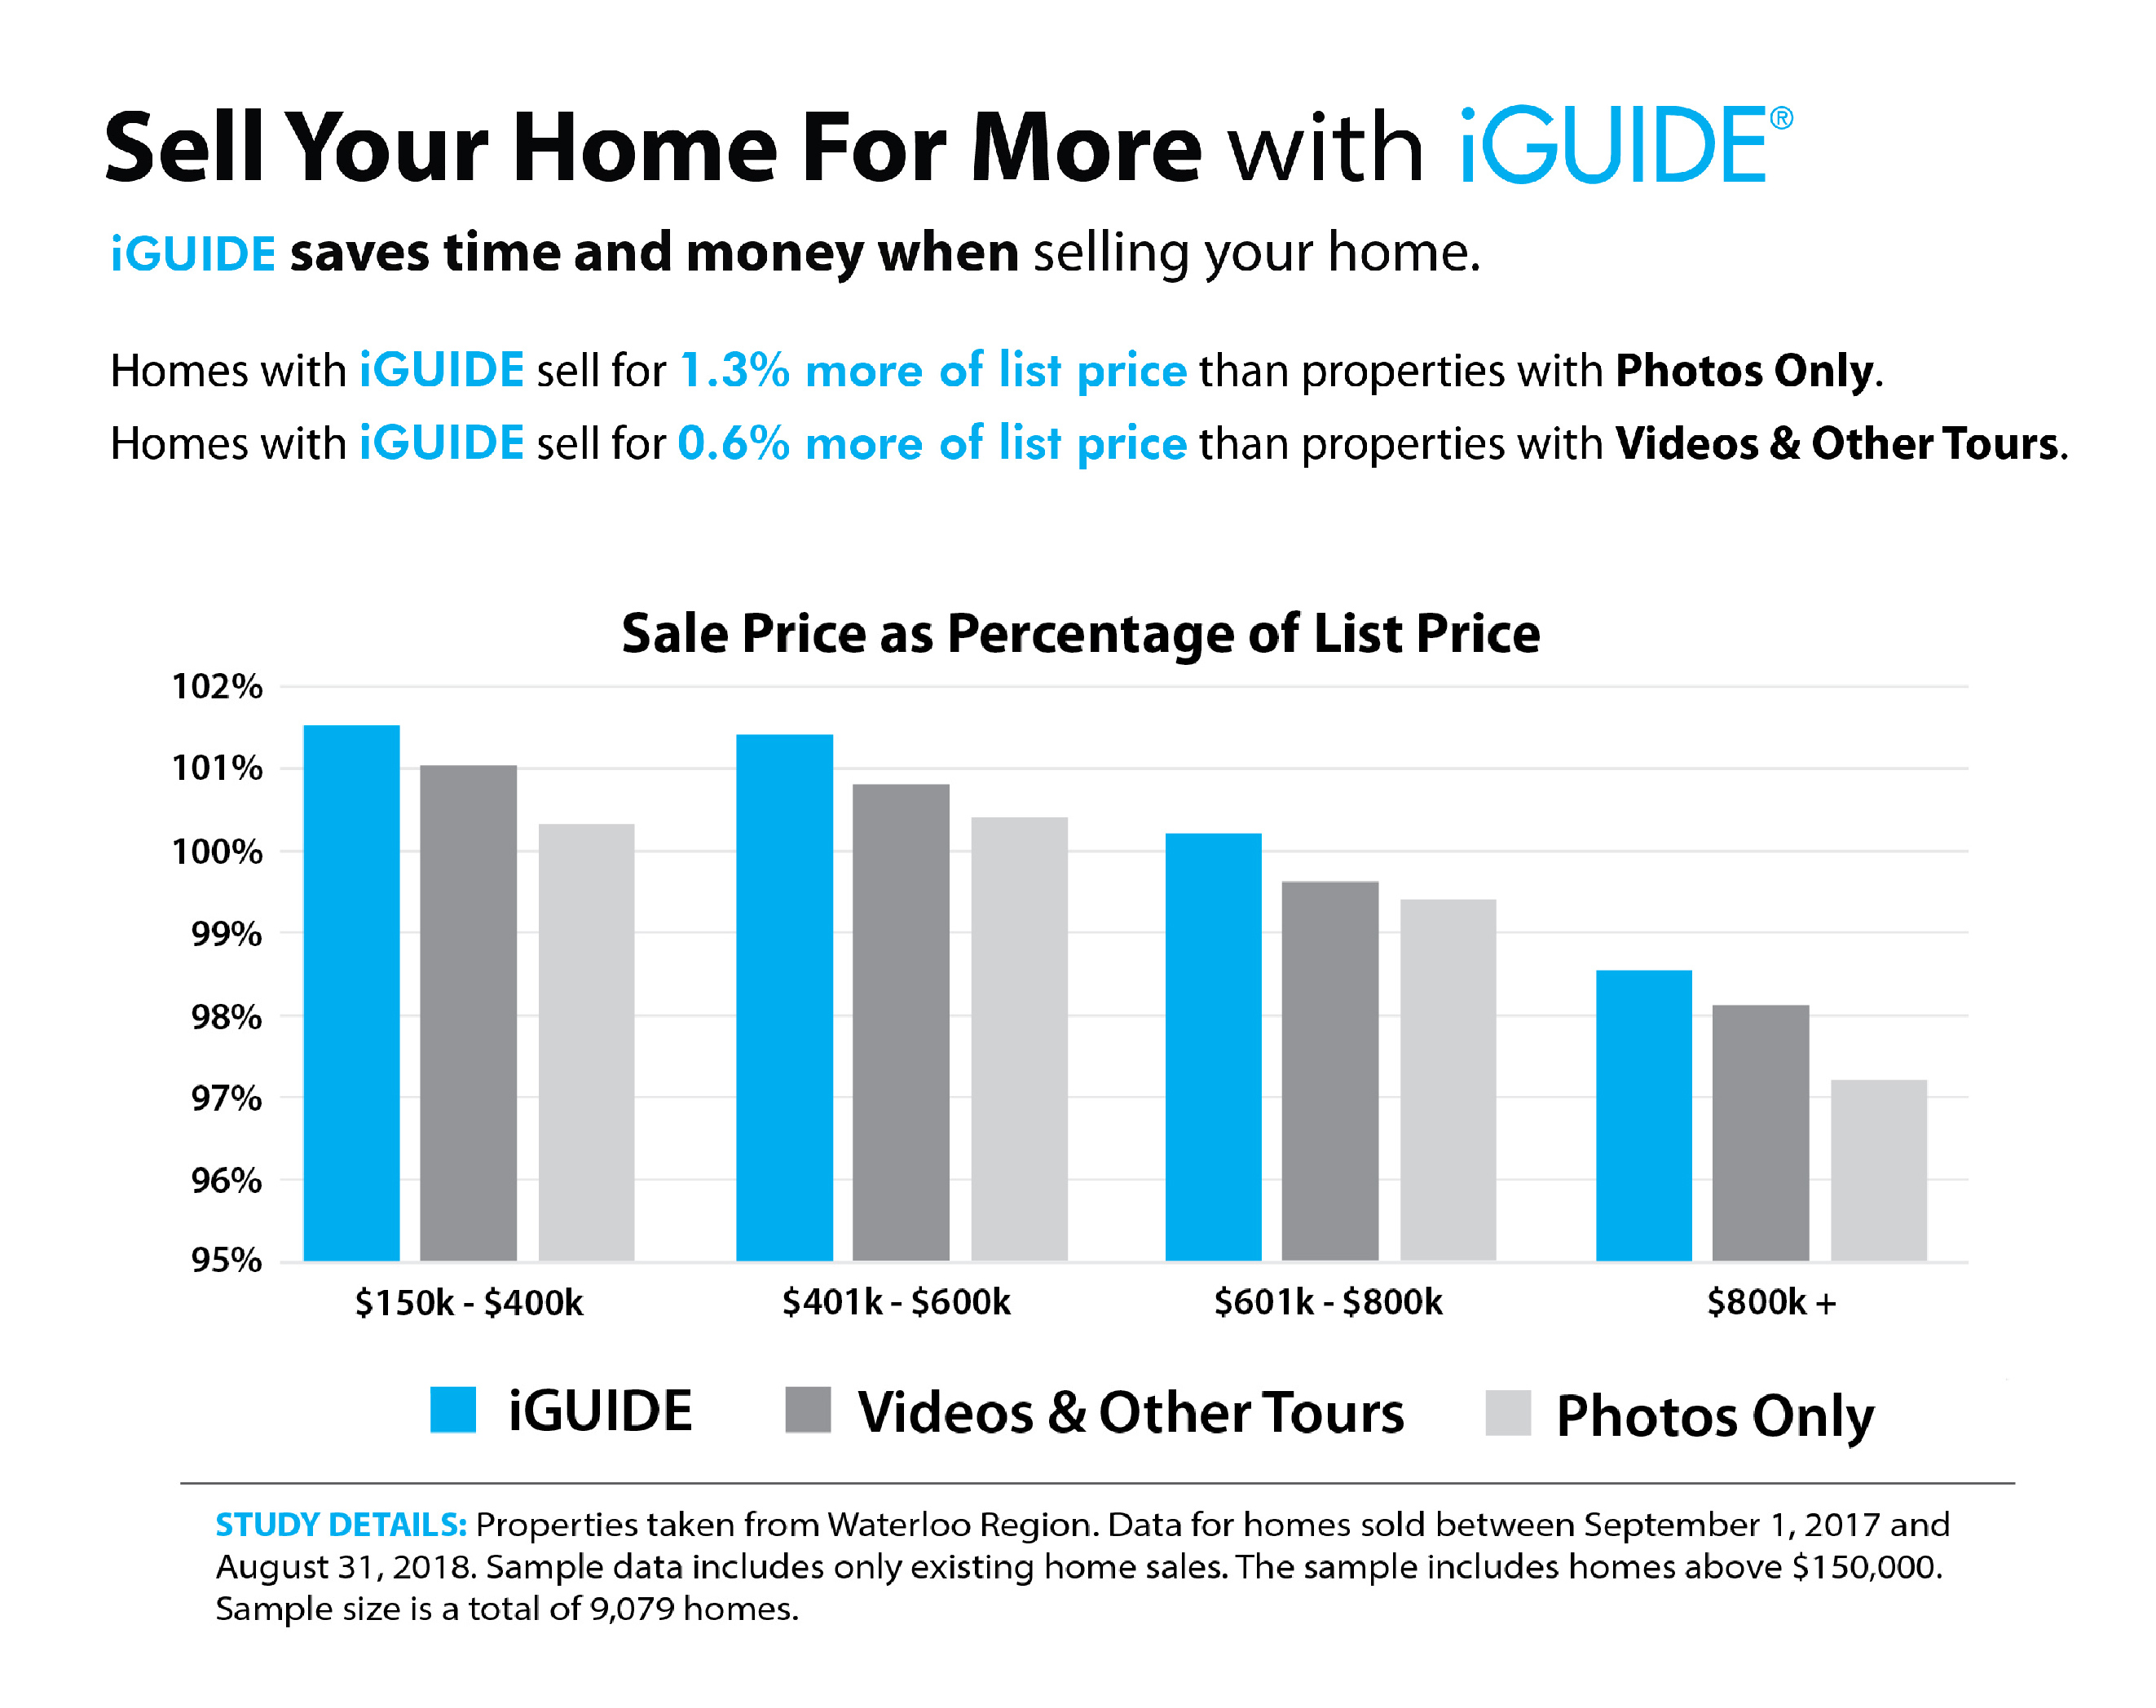 iGuide saves time and money when selling your home in Raleigh, Durham, Charlotte, Greensboro, and Winston-Salem North Carolina.